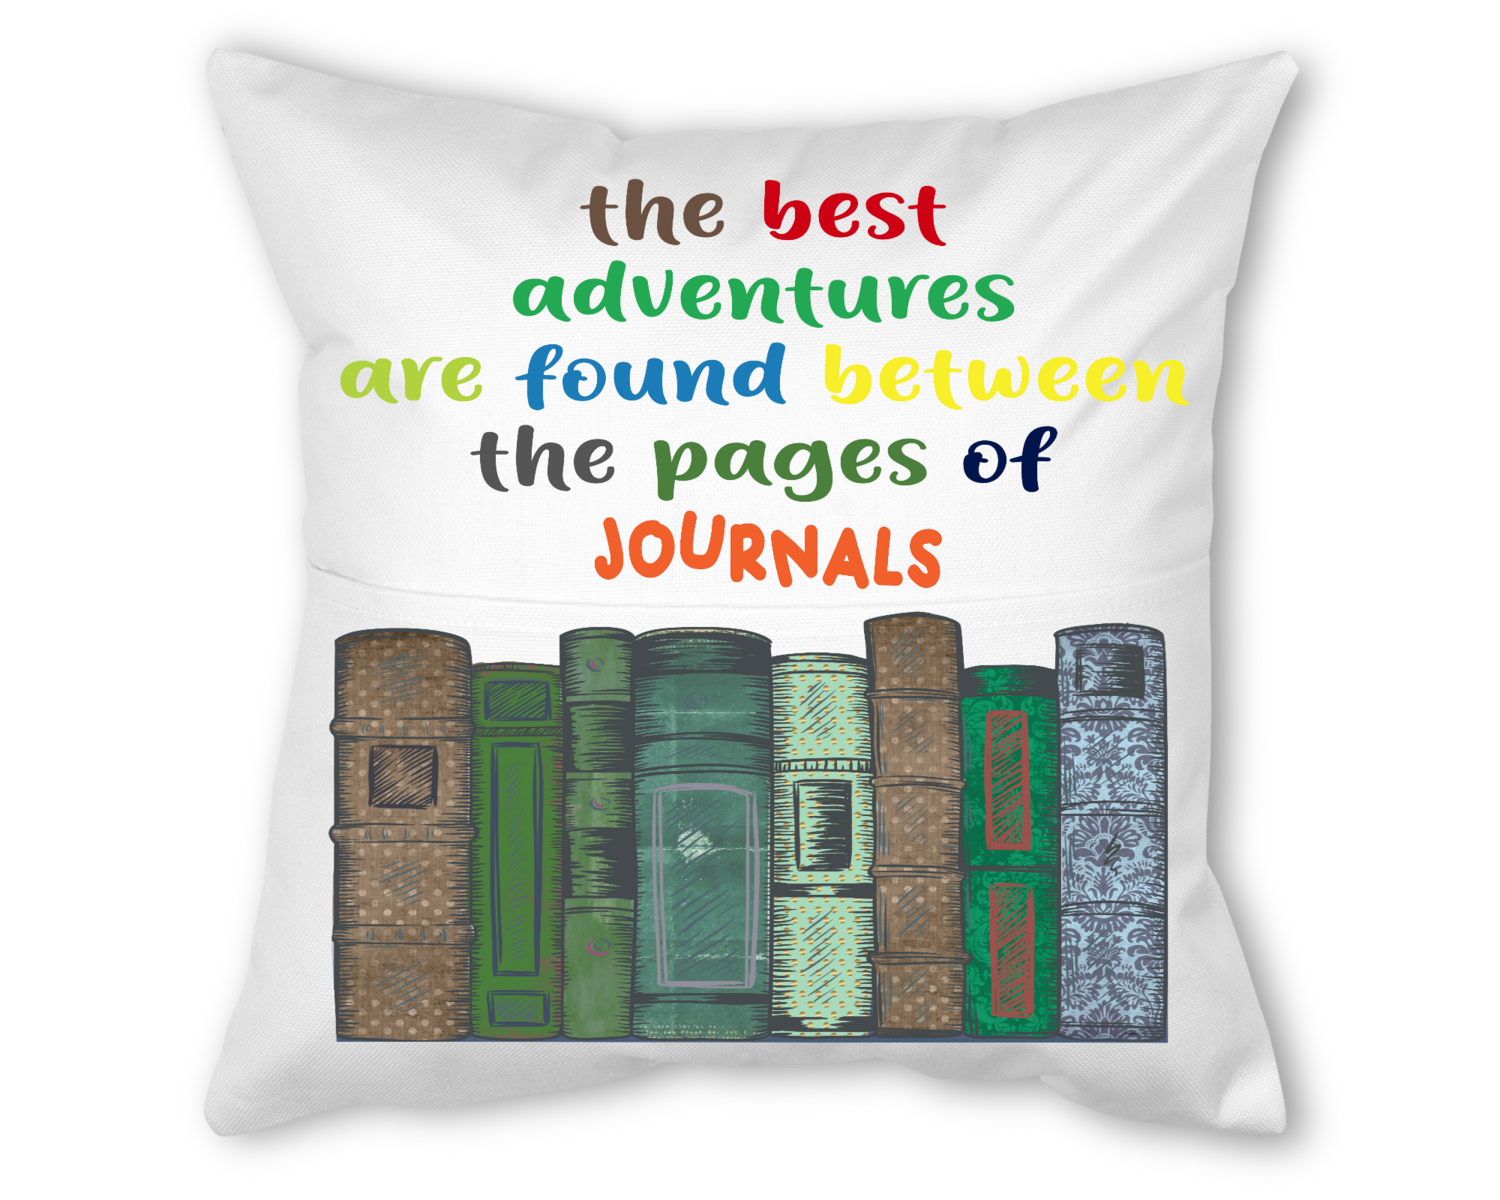 Crafting Pillow With Pocket: THE BEST ADVENTURES ARE FOUND BETWEEN THE PAGES OF JOURNALS